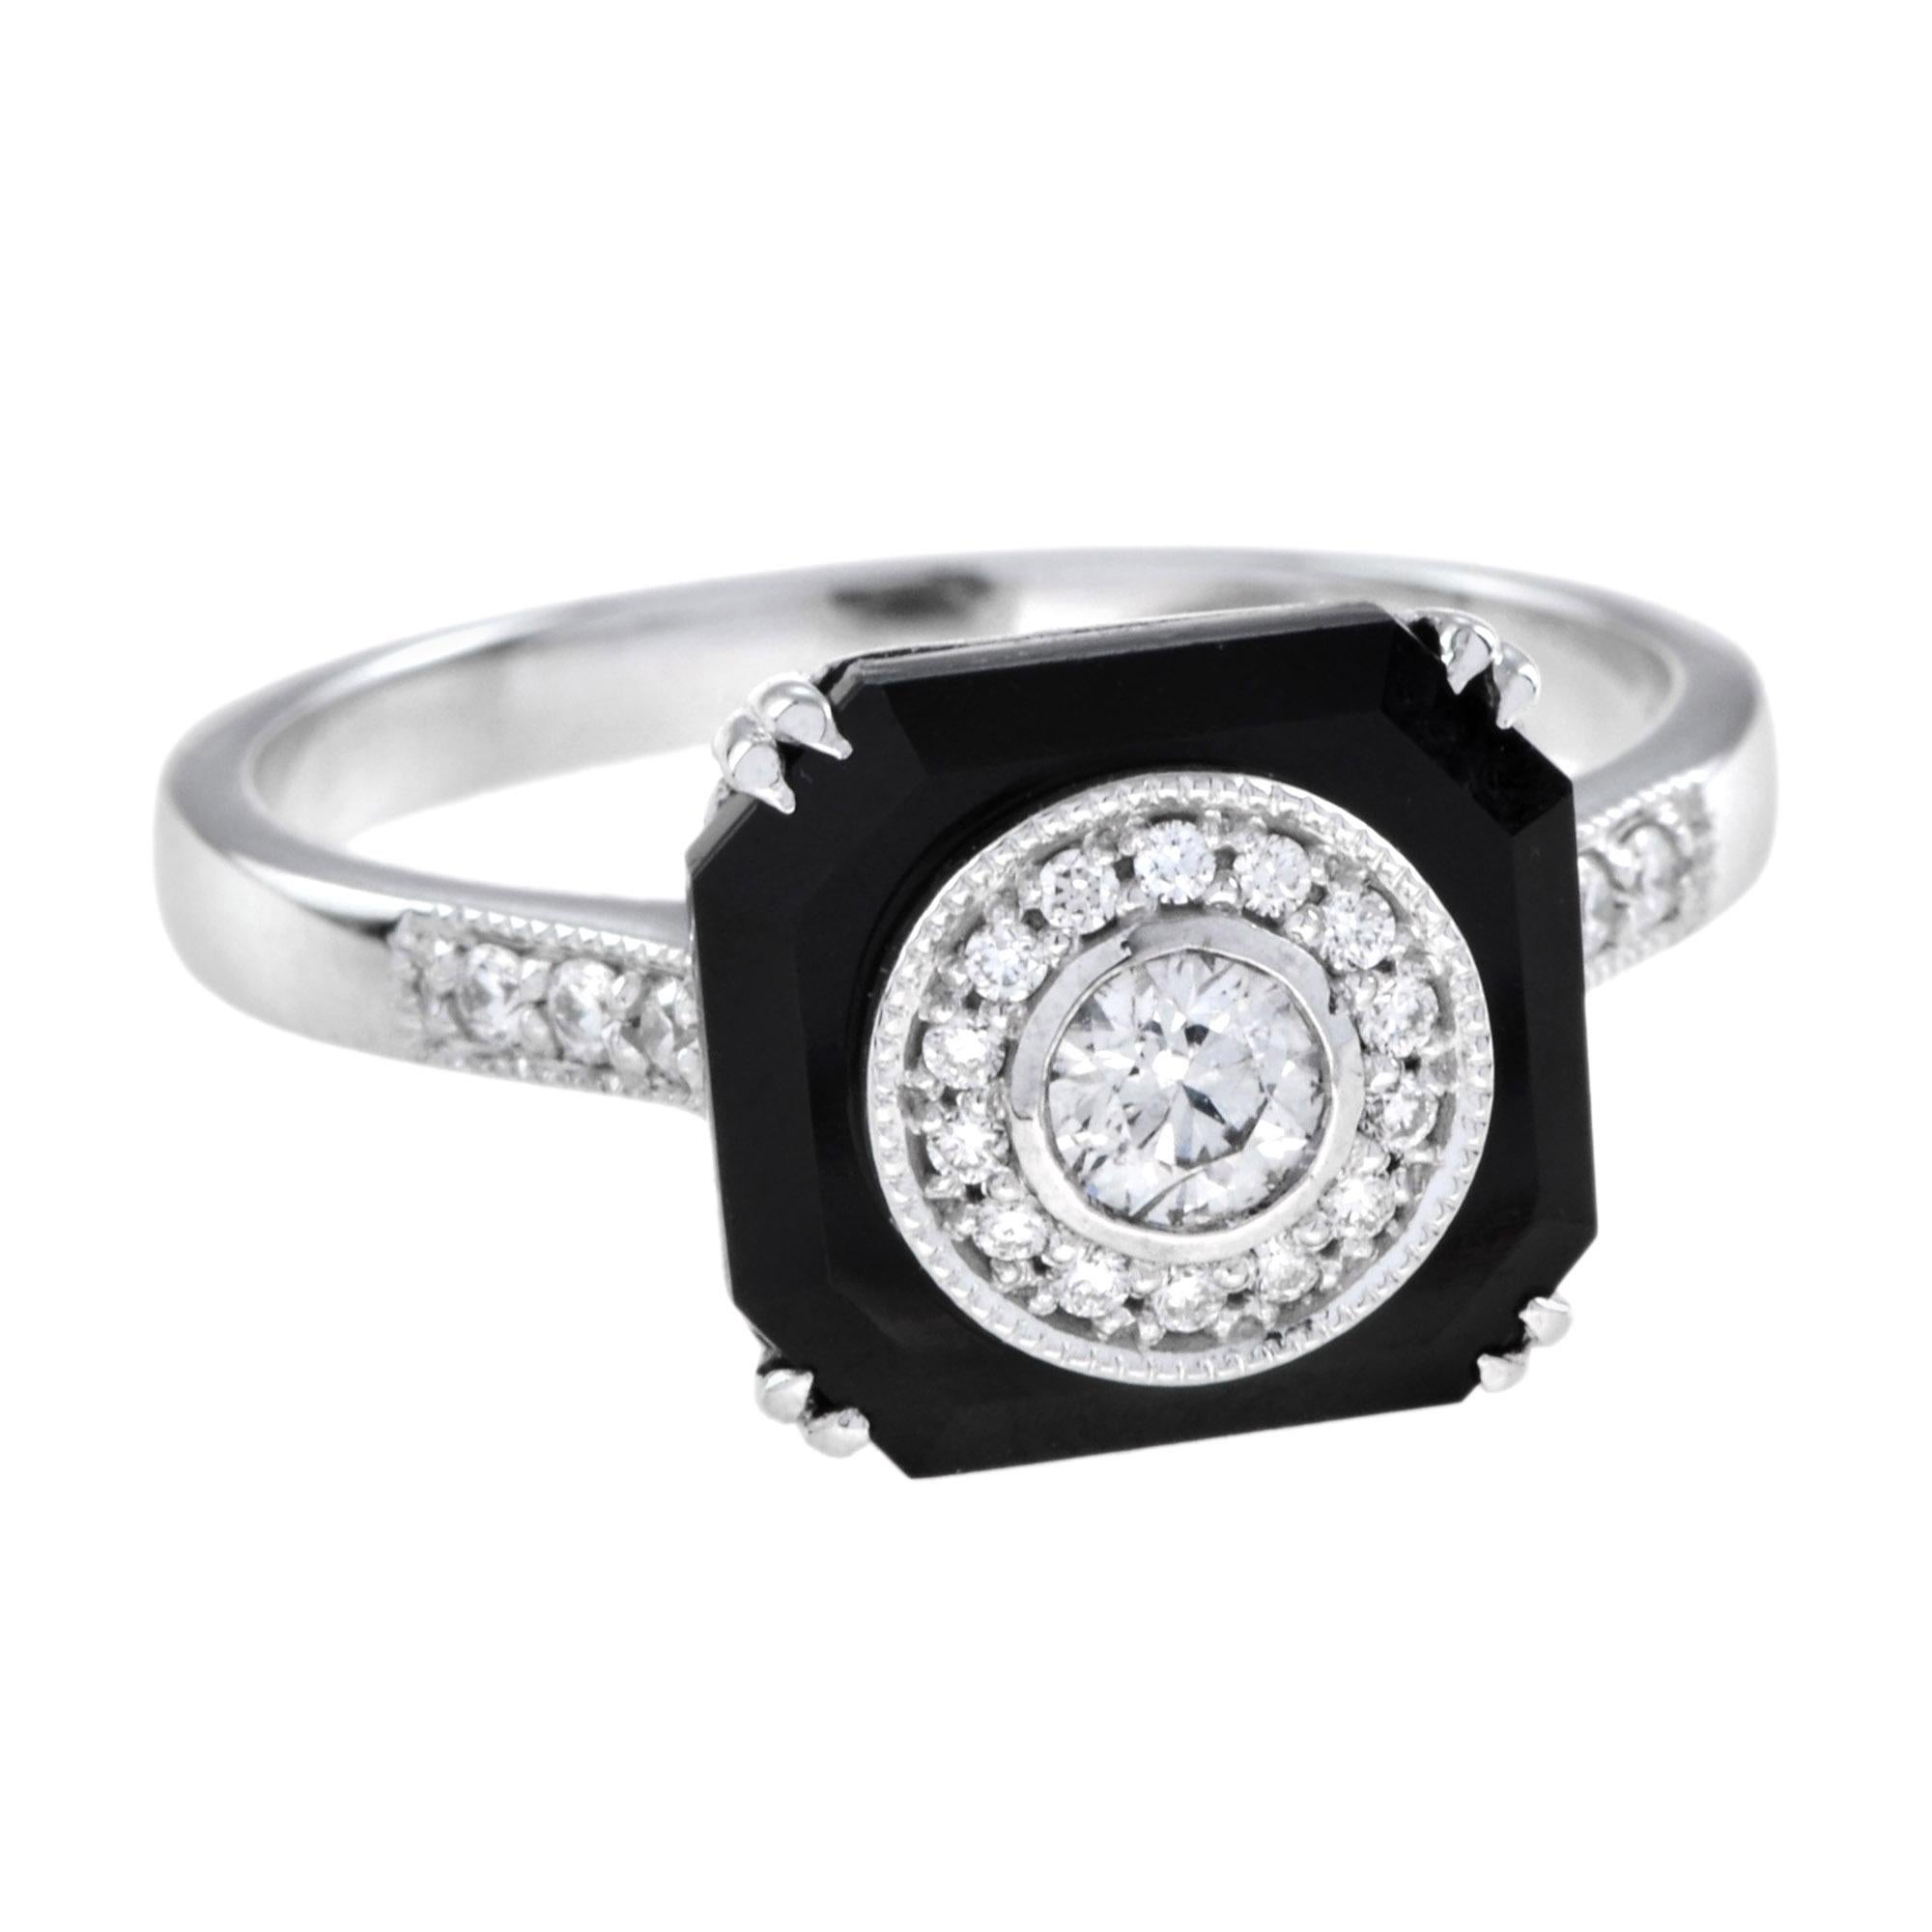 A stunning, fine and impressive Art Deco style diamond and onyx halo ring. A total of .28 carats of diamond are set in octagonal shaped onyx. A stunning piece to match with your everyday look.

Ring Information
Style: Art-deco
Metal: 14K White